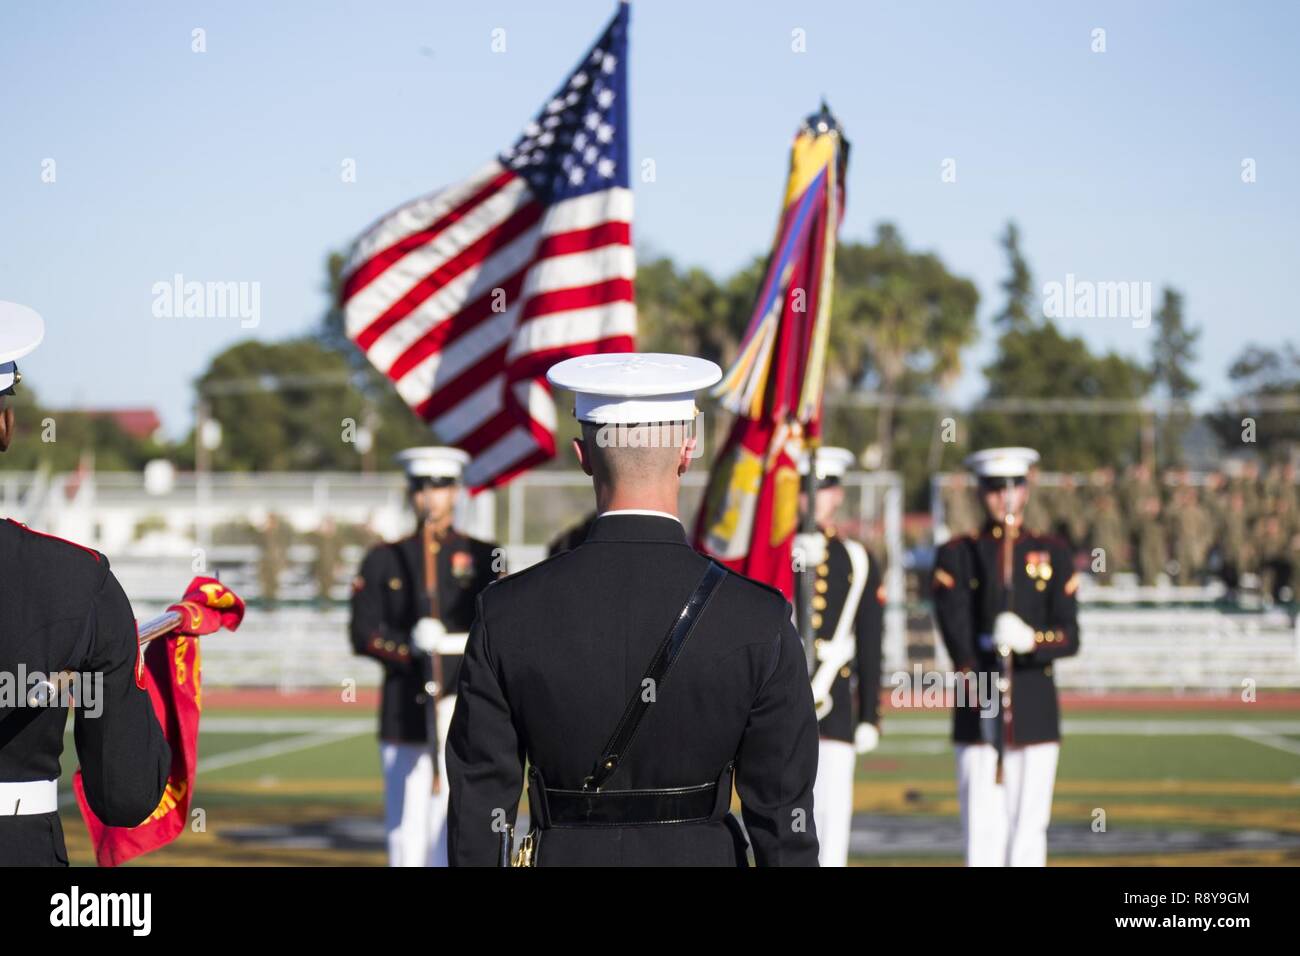 U.S. Marines with the Official Color Guard of the Marine Corps, Battle Color Detachment, Marine Barracks Washington, D.C., perform during the Battle Color Ceremony at the 11 Area football field on Camp Pendleton, Calif., March 9, 2017. The ceremony featured “The Commandant’s Own," the United States Marine Drum & Bugle Corps, the Silent Drill Platoon, and the Official Color Guard of the Marine Corps. Stock Photo